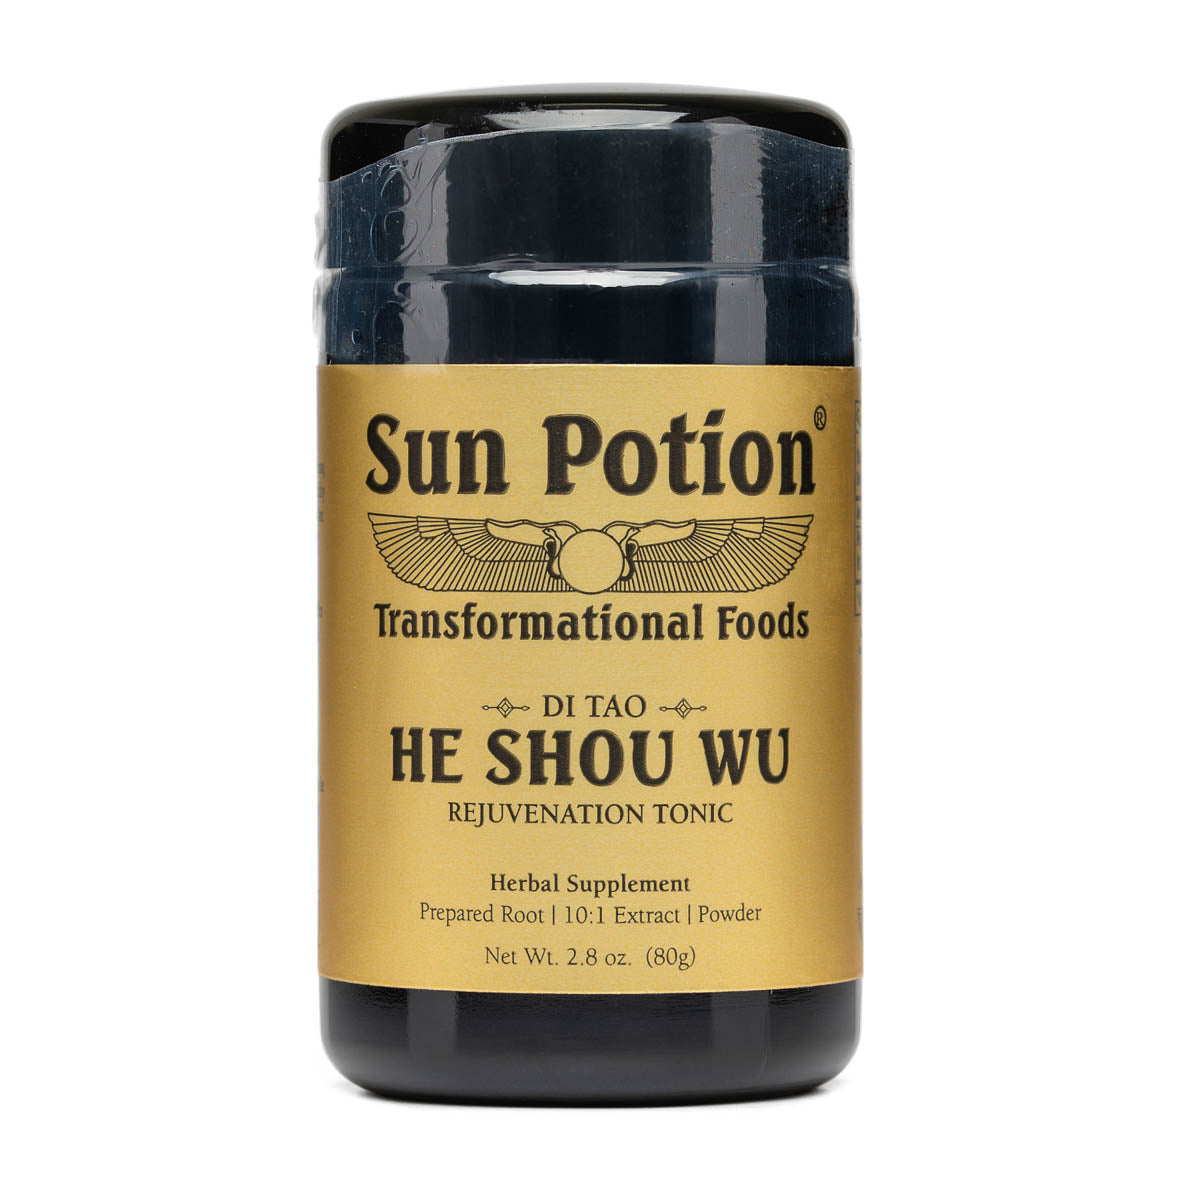 Wildcrafted He Shou Wu | Sun Potion | Raw Living UK | Tonic Herbs | Sun Potion He Shou Wu 10:1 Wildcrafted Extract Powder: this Tonic Herb &amp; Adaptogen has a long history of use. Use in Smoothies, Elixirs, Lattés &amp; Raw Creations.